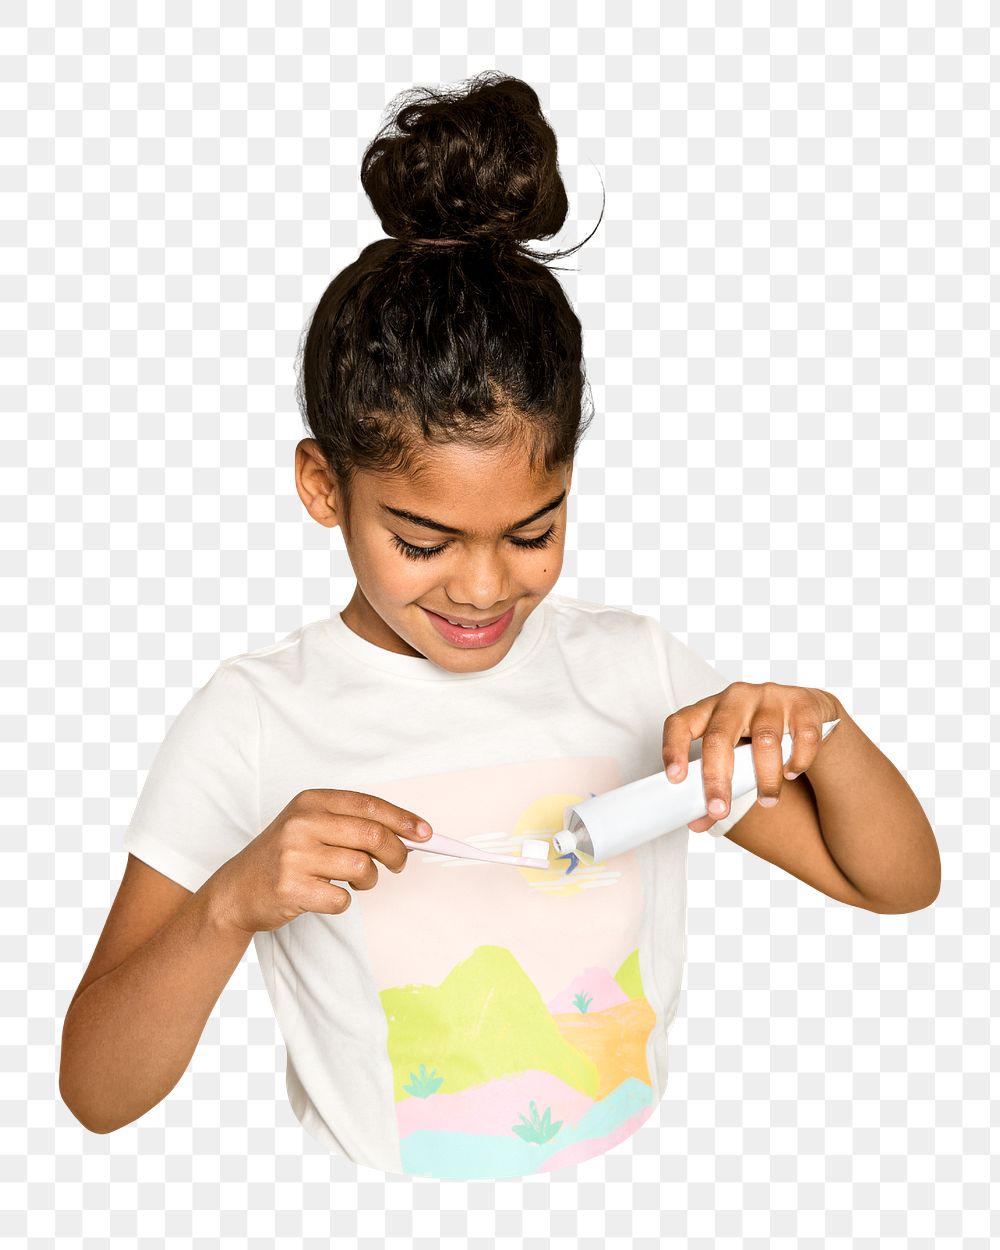 Png girl brushing teeth, health image on transparent background